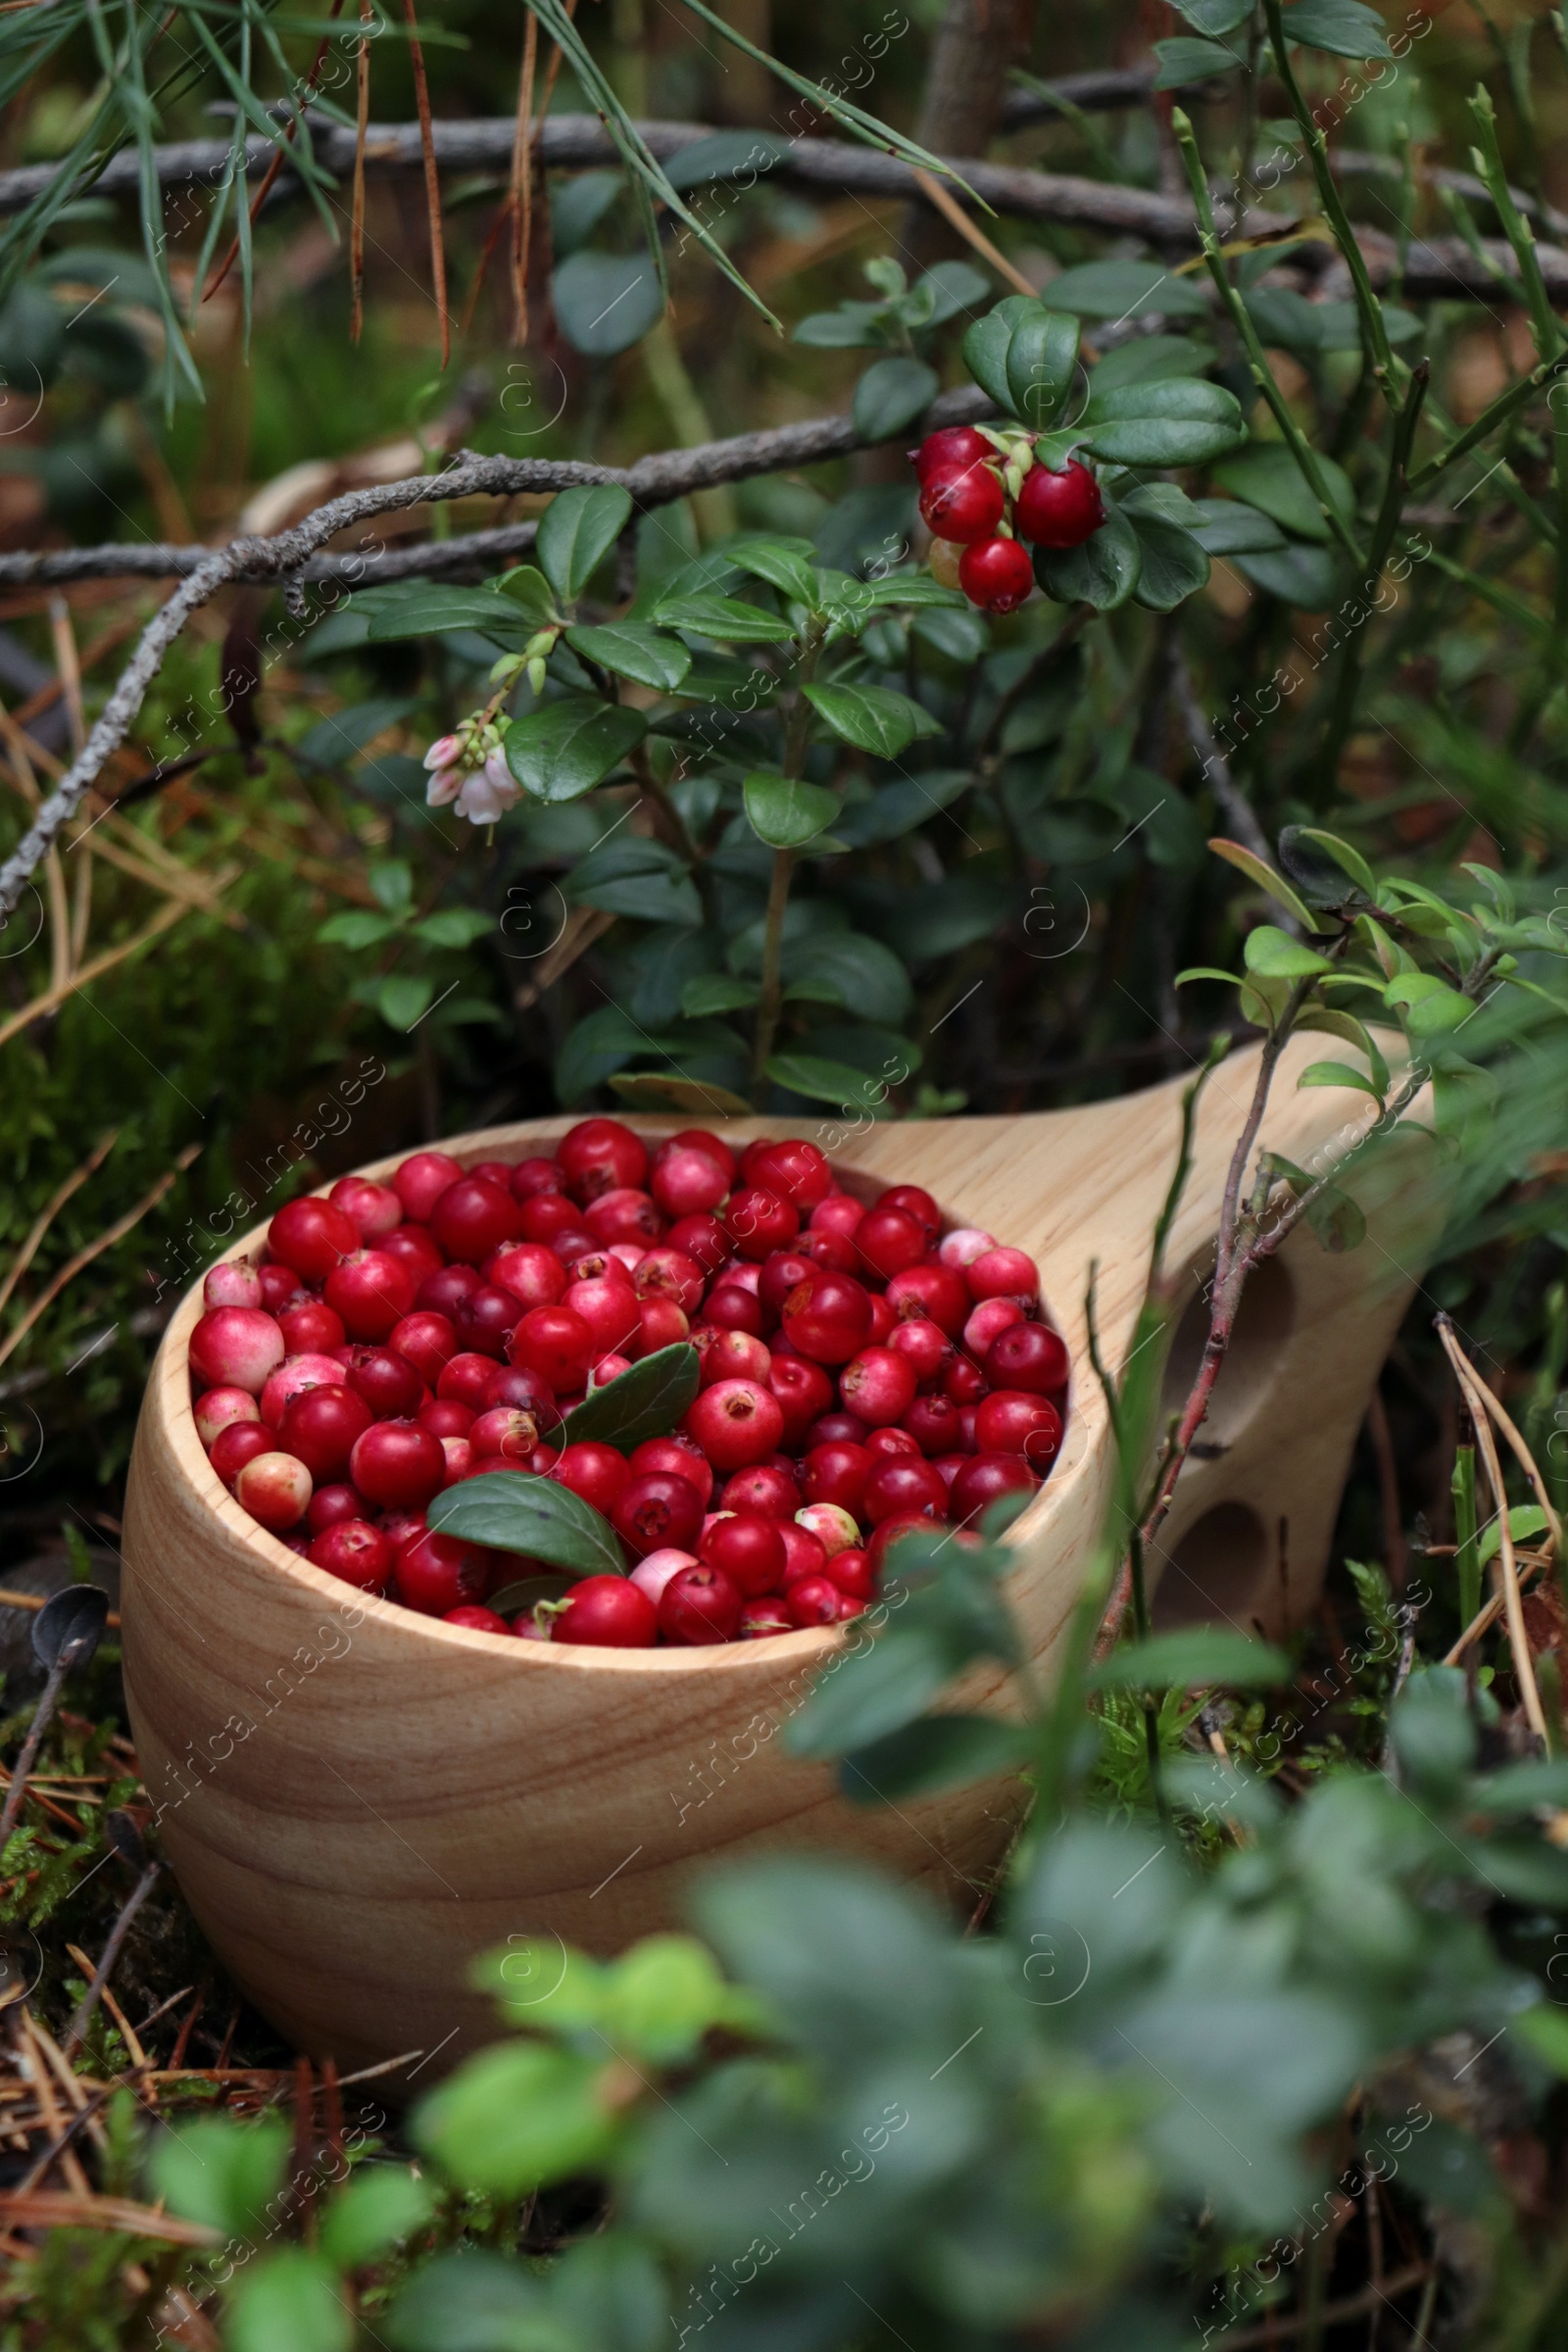 Photo of Many tasty ripe lingonberries in wooden cup outdoors